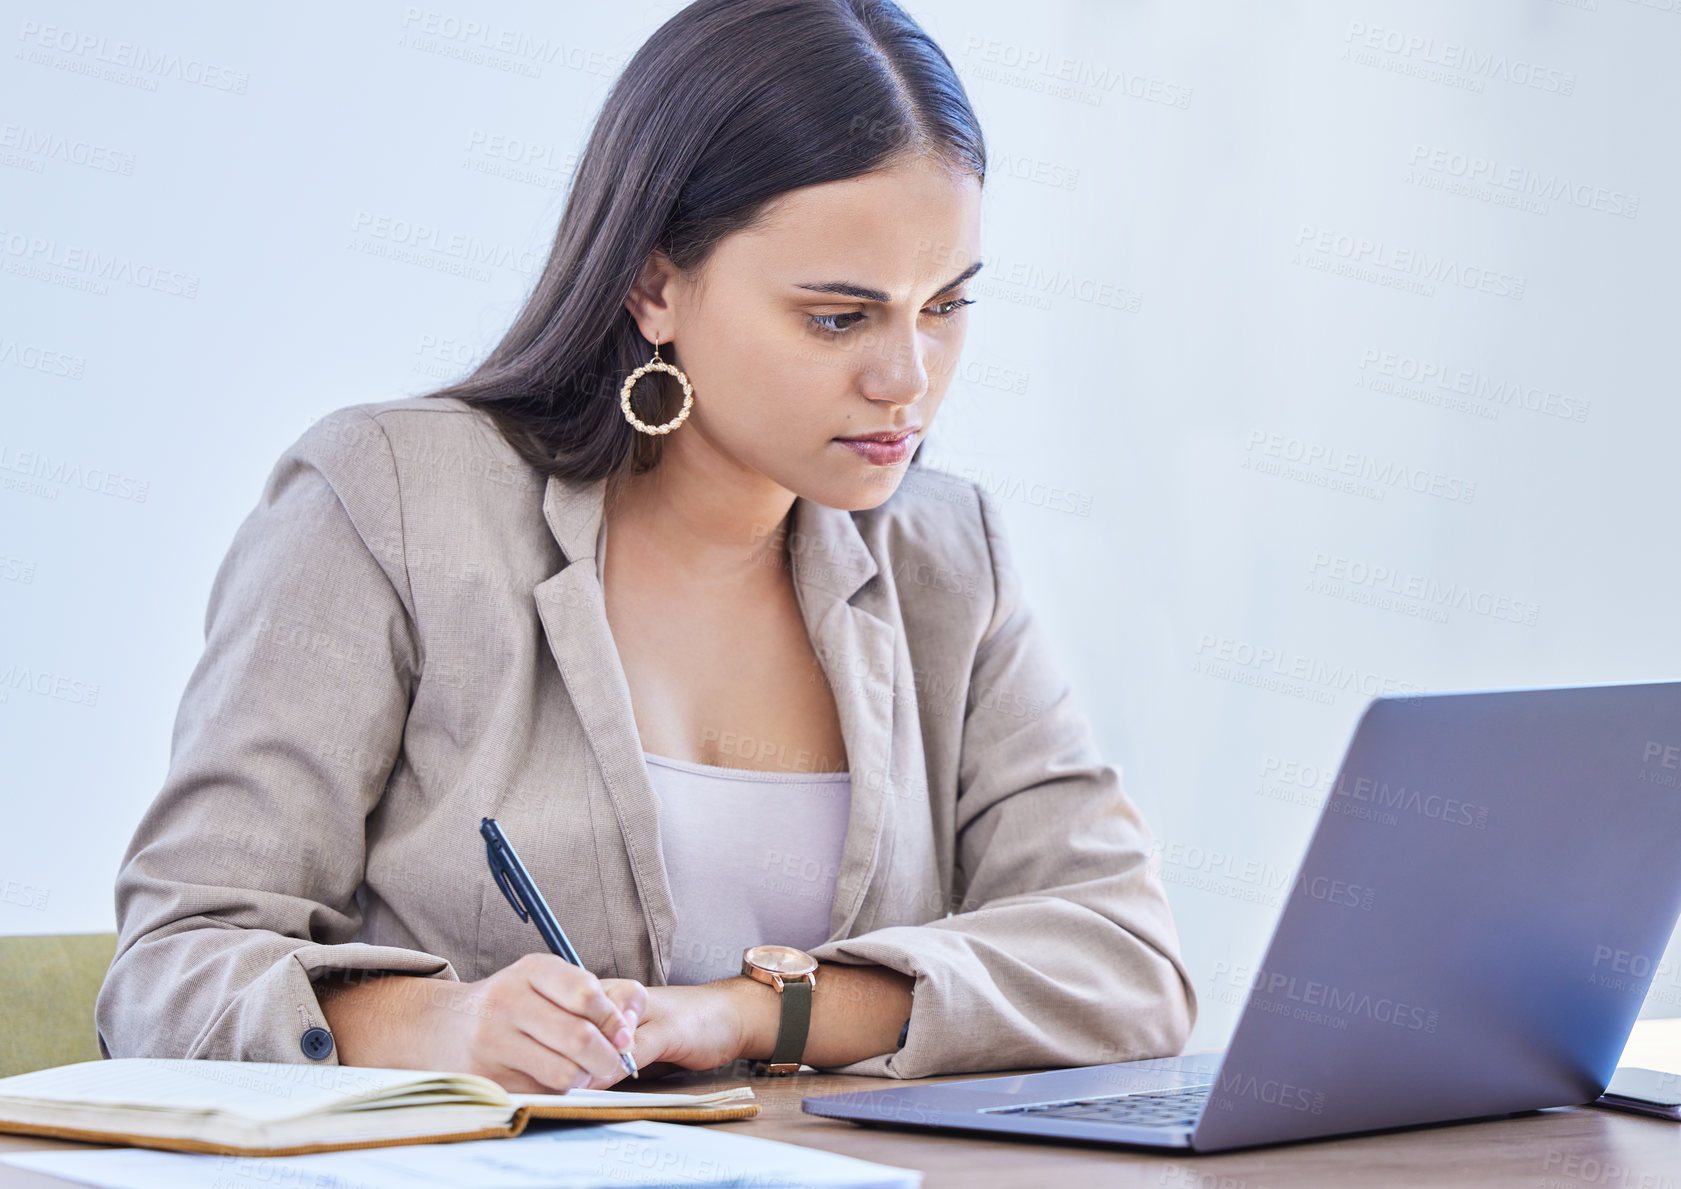 Buy stock photo Shot of a young businesswoman writing notes while working on a laptop in an office